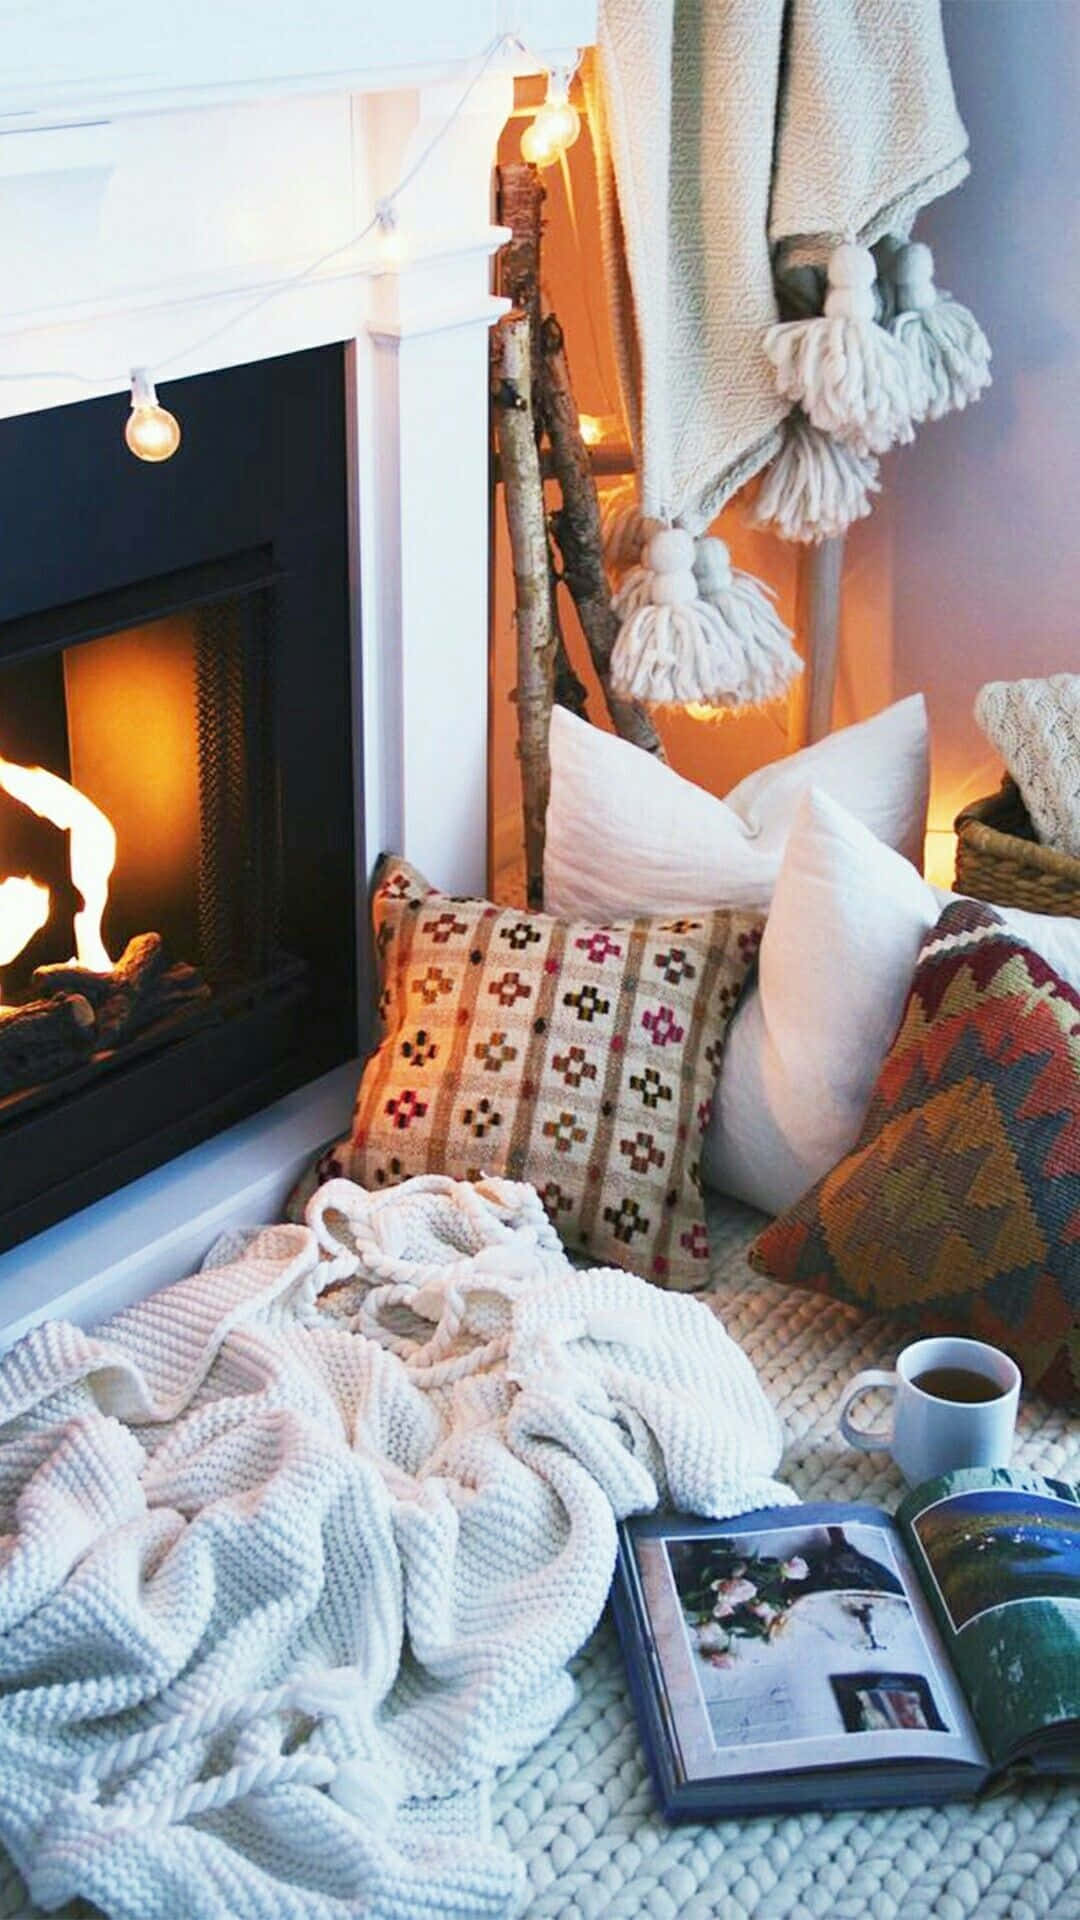 Get cozy at home with your iPhone Wallpaper